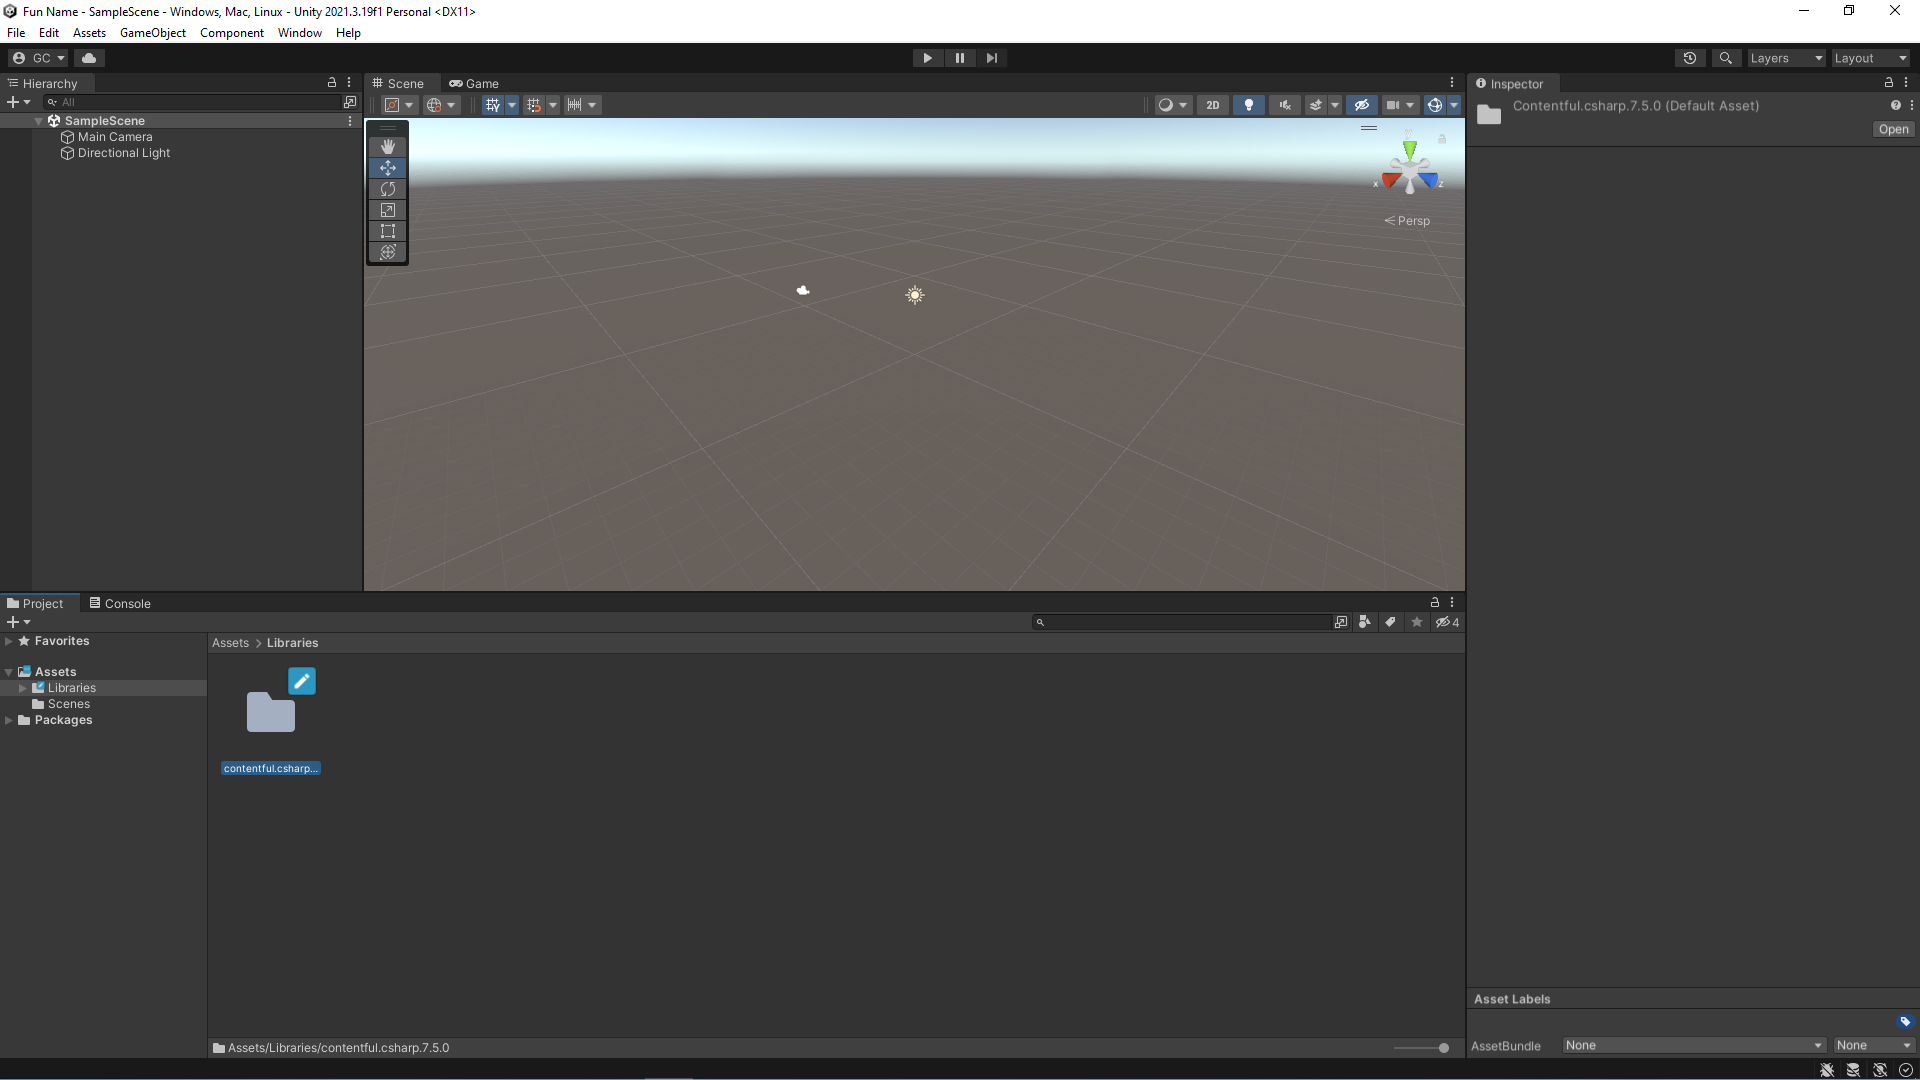 Create a Libraries folder in your Unity Assets, add your contentful.csharp folder.